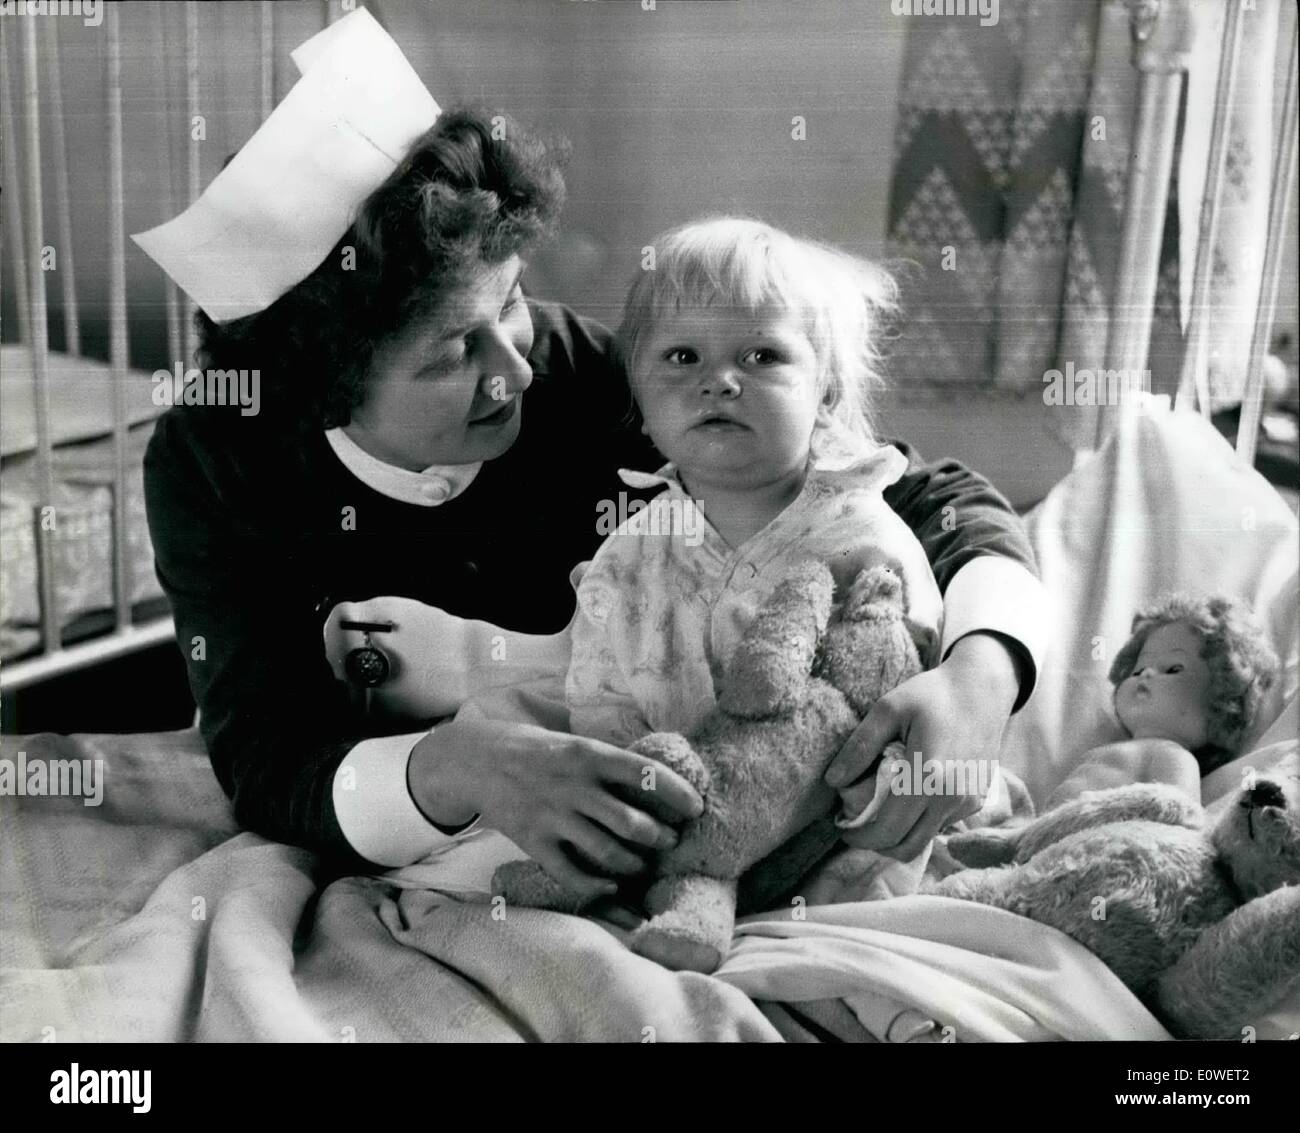 Oct. 10, 1962 - Girl lives after falling beneath a train.: Eighteen-month-old Anne Herbertson had a miracle escape from death beneath the wheels of a train on a level crossing at Usworth, Co. Durham. She and two-year-old playmate Audrey Laing were playing on the crossing when the diesel freight brain bore down o them, brakes jammed and hooter blowing. Mrs.Margaret Henderson, 61, ran from the door of her home 20 yards from the crossing and managed to pull Audrey clear. But Anne fell beneath the wheels of the train Stock Photo